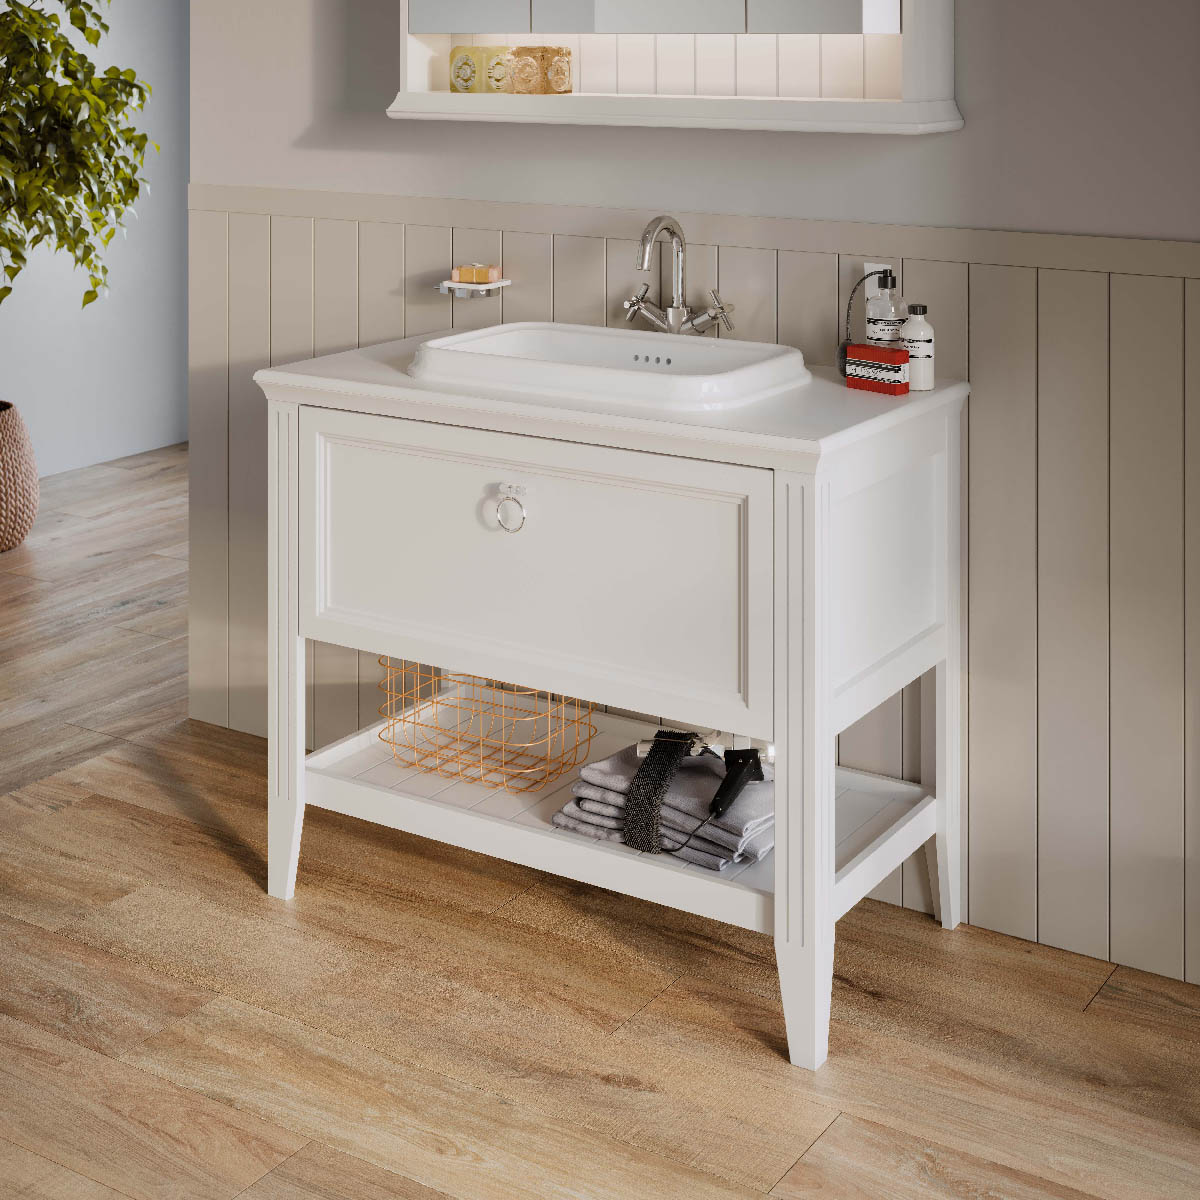 How to use the washstand in the rest room here-part4